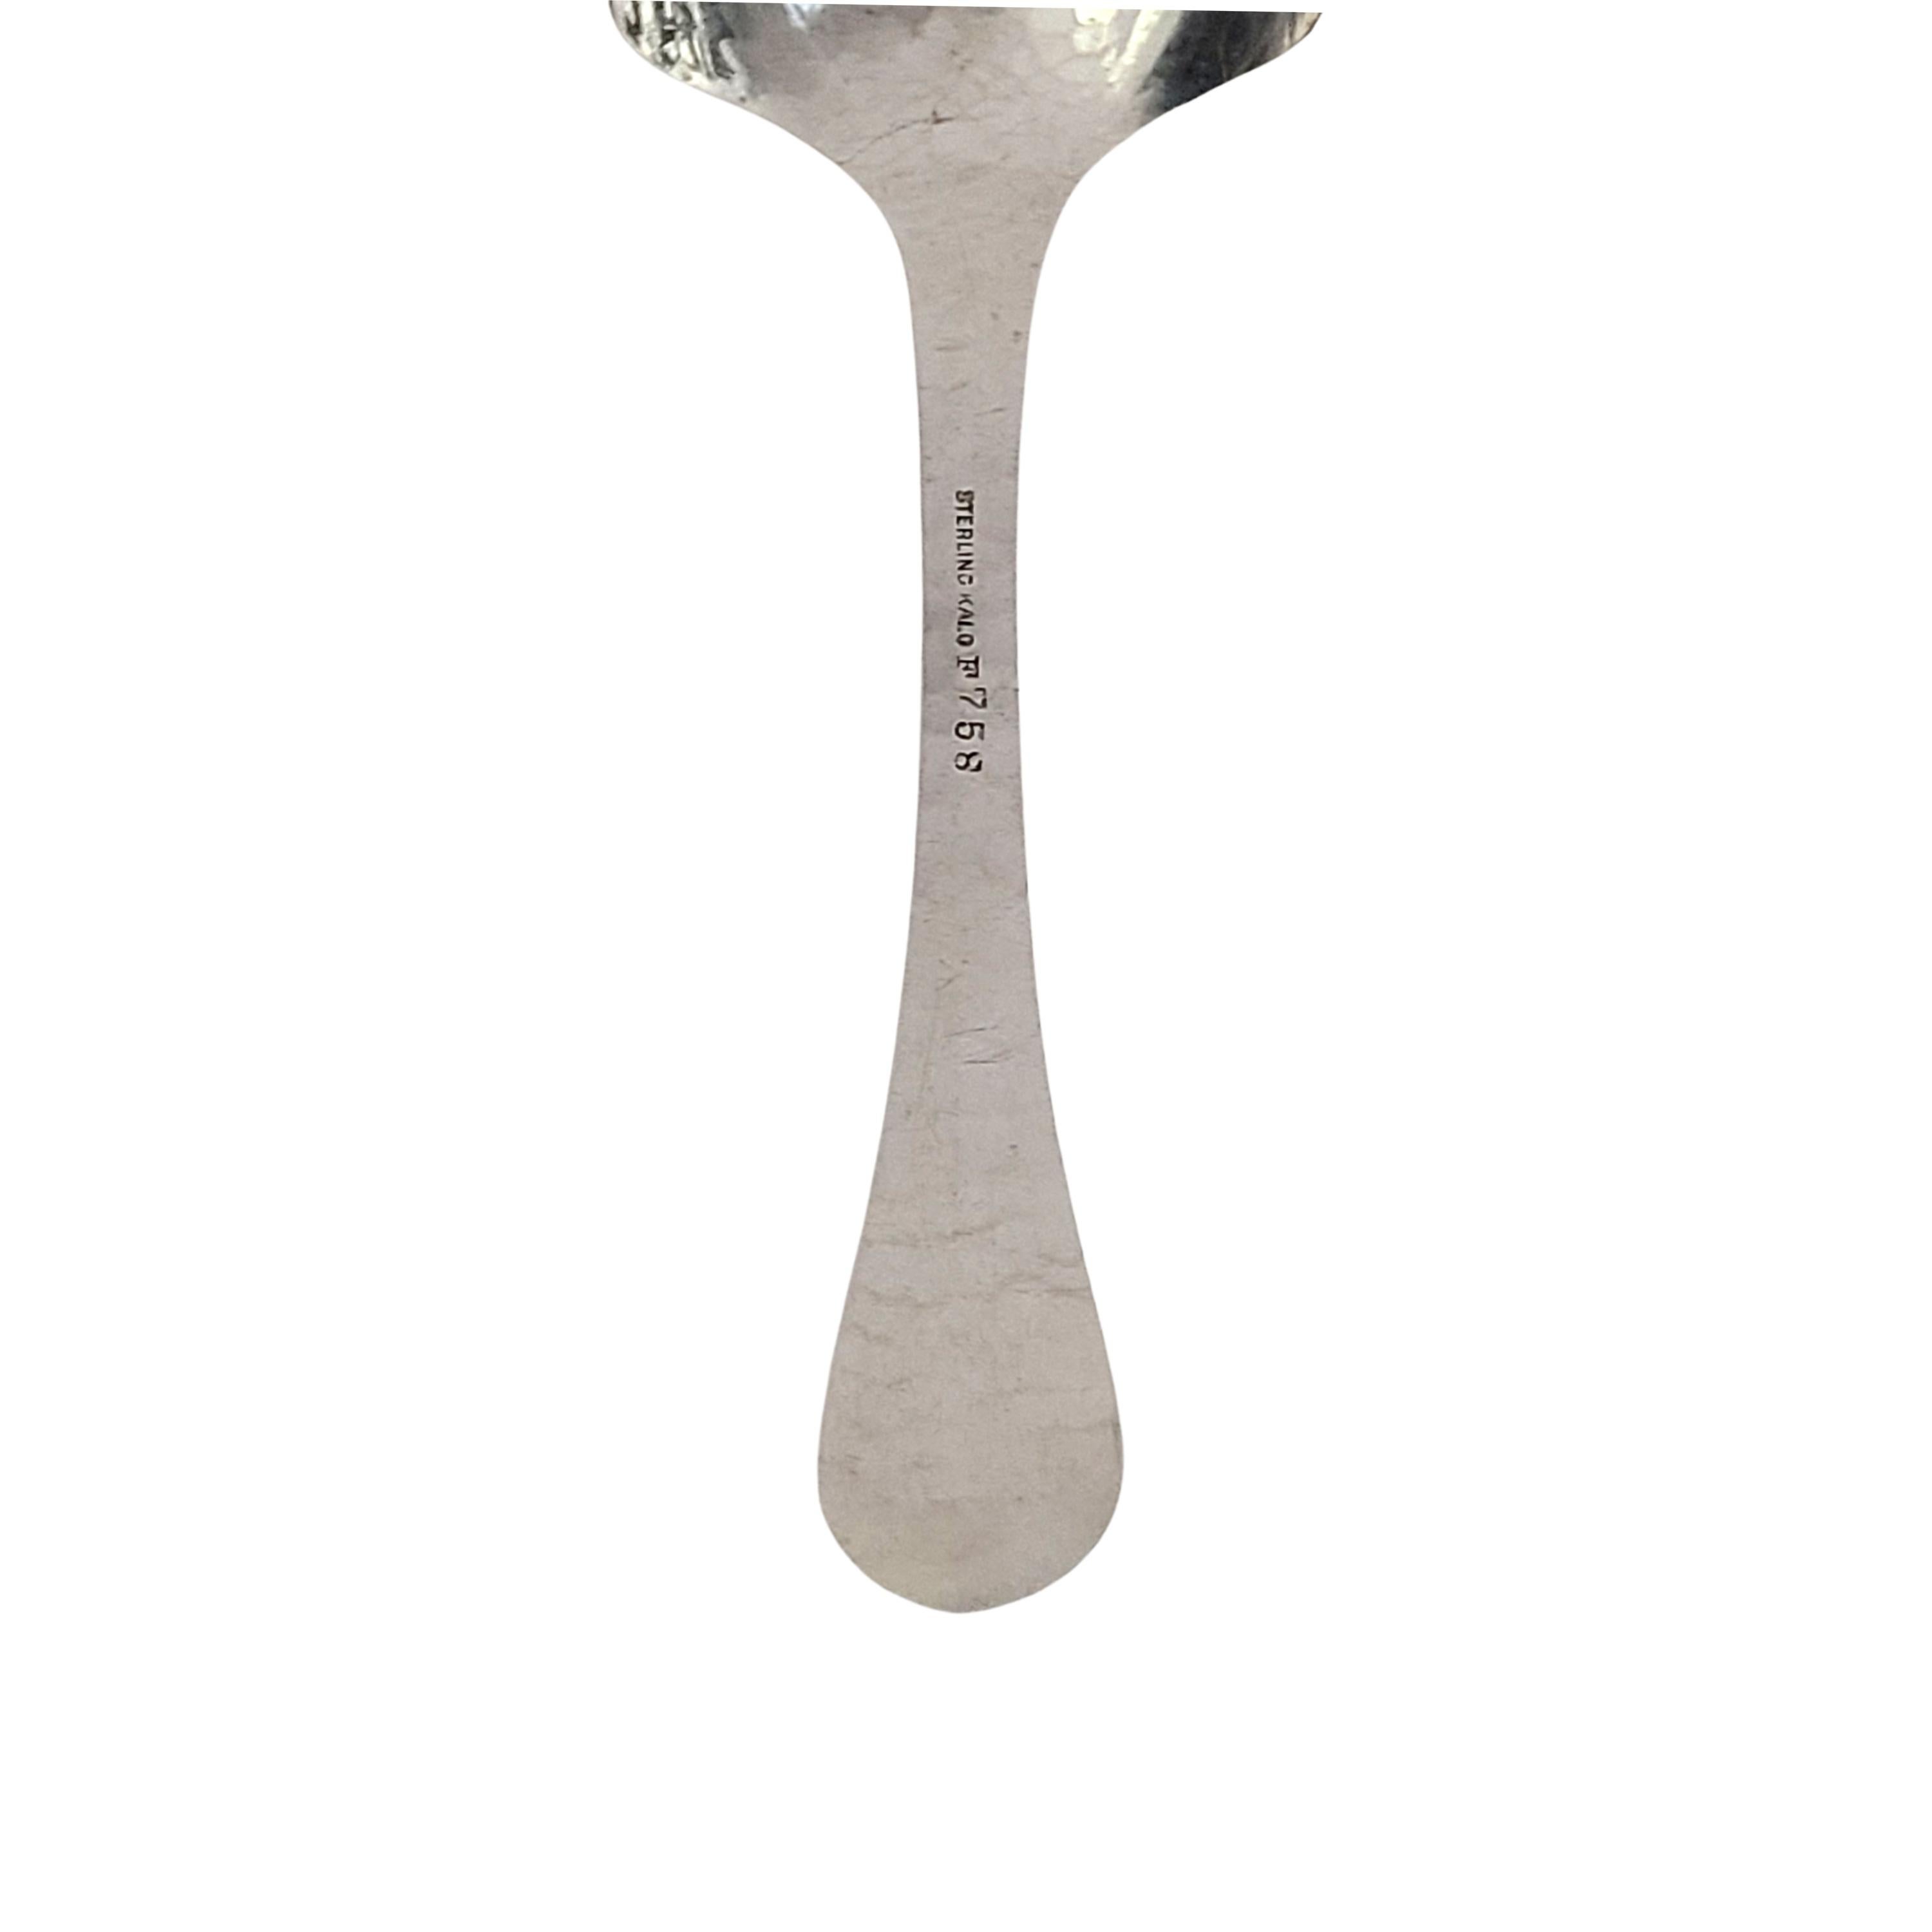 Kalo Hammered Sterling Silver Jelly/Pie Server 1